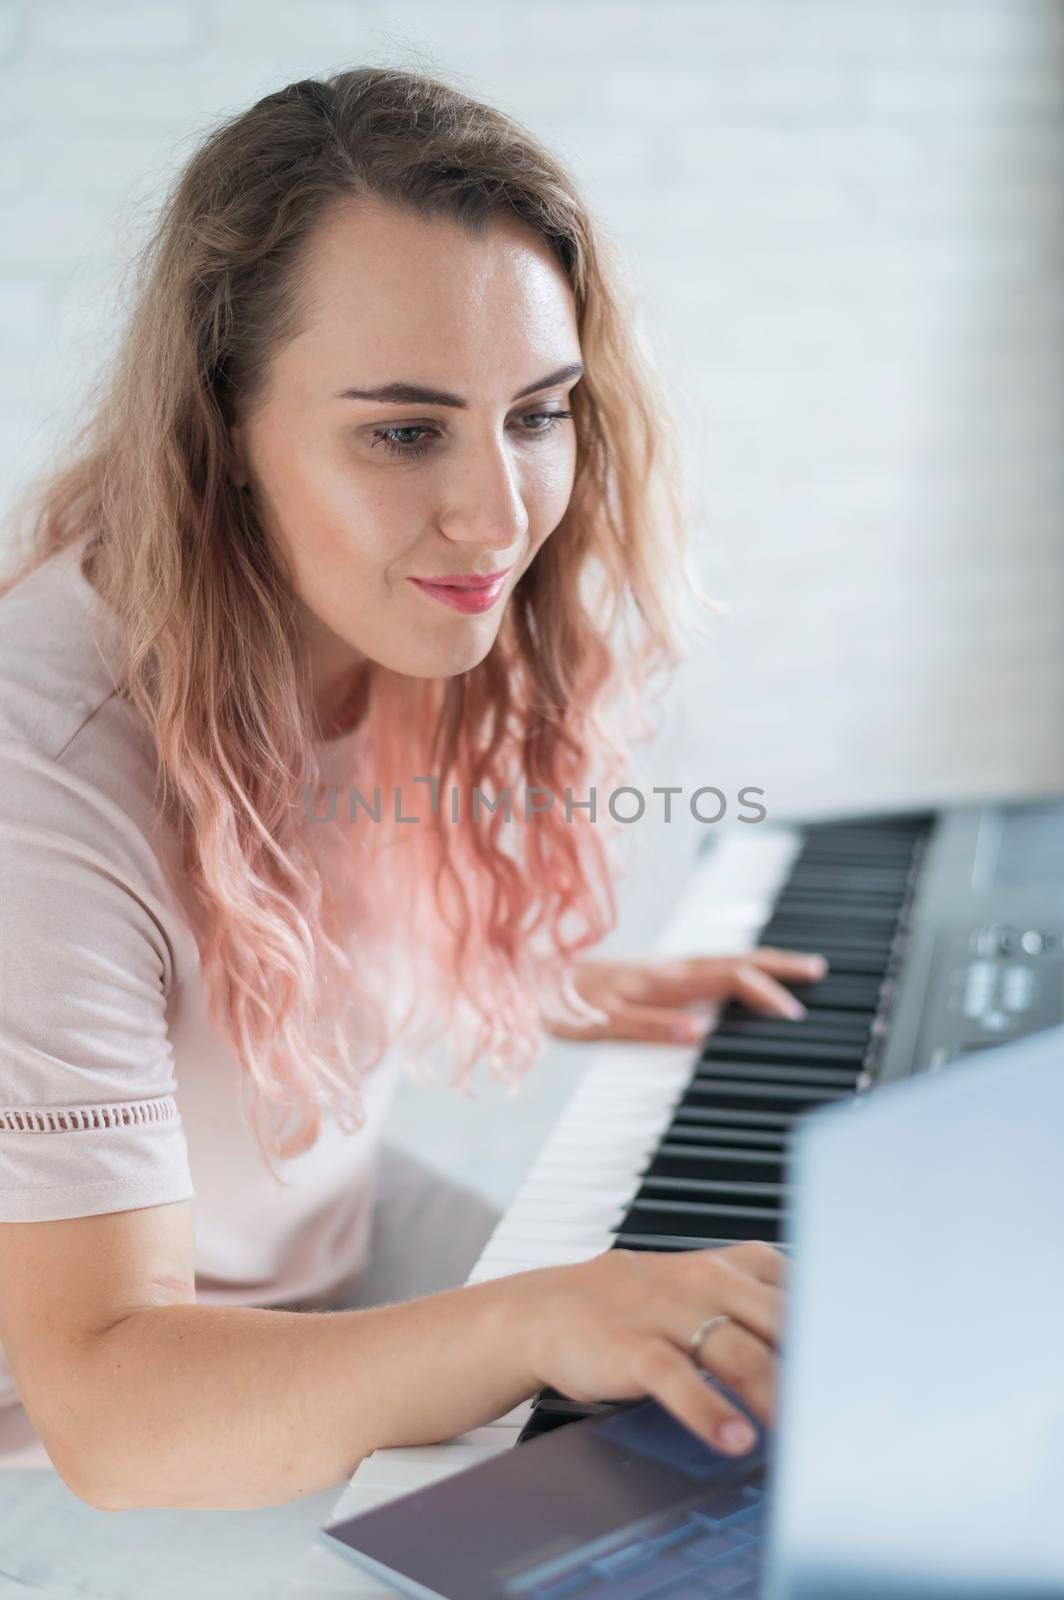 A friendly woman plays the electronic piano and conducts a video blog on her laptop. Stay home. Musical instrument teacher. Distance learning music quarantined. by mrwed54